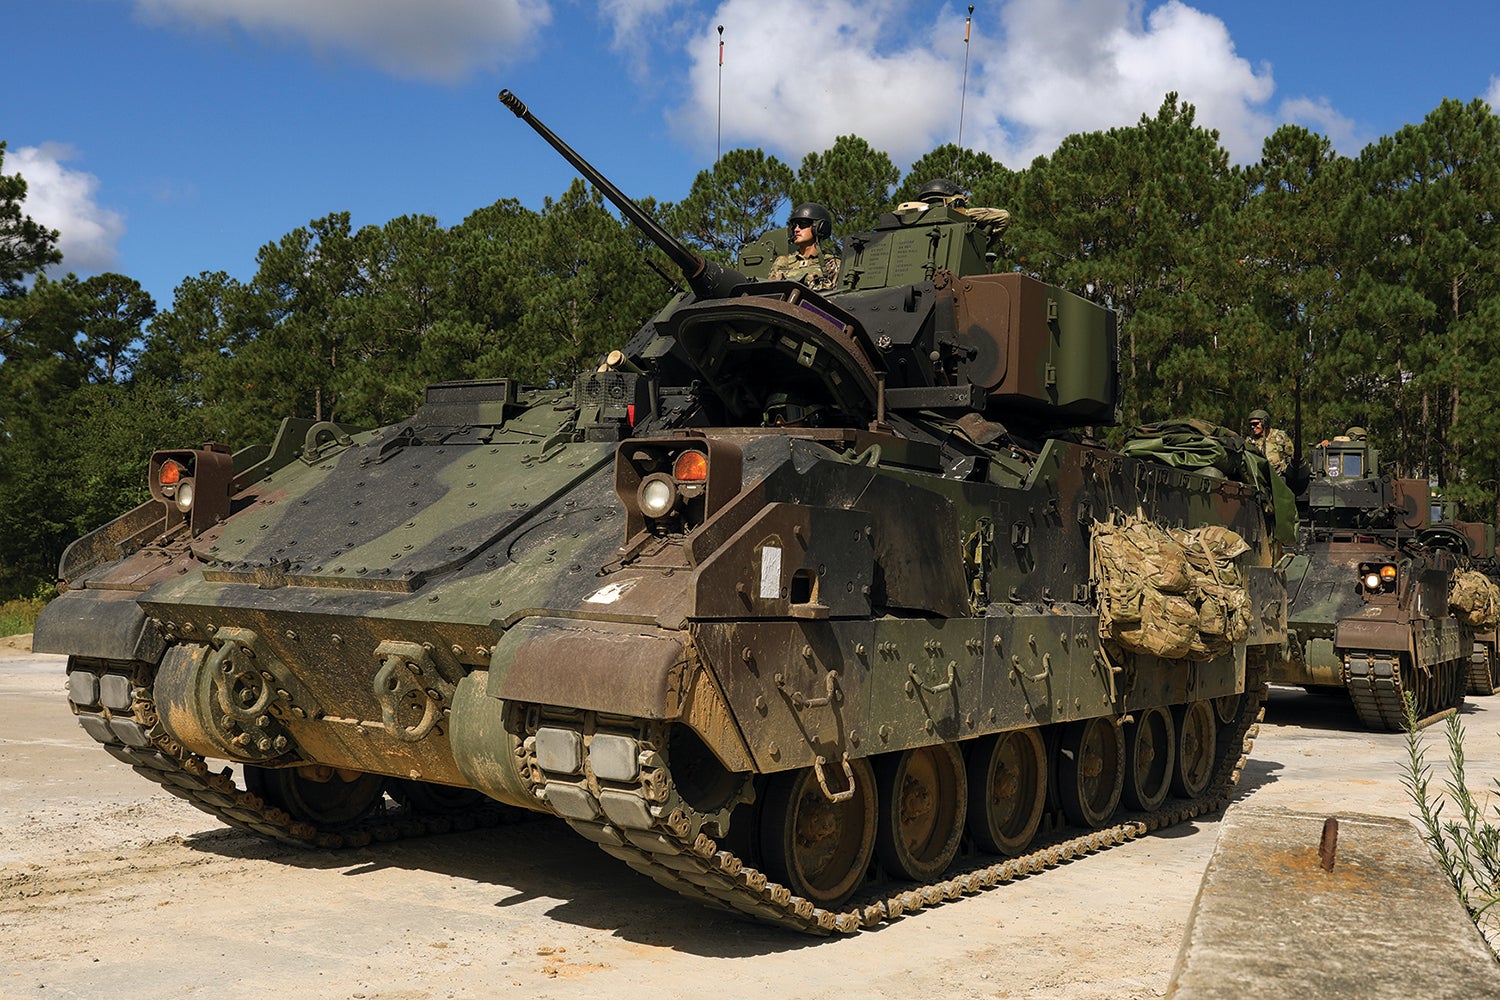 Soldiers with the 1st Armored Brigade Combat Team, 3rd Infantry Division, prepare their Bradley Fighting Vehicles for a live-fire exercise at Fort Stewart, Georgia. (Credit: U.S. Army/Spc. Duke Edwards)